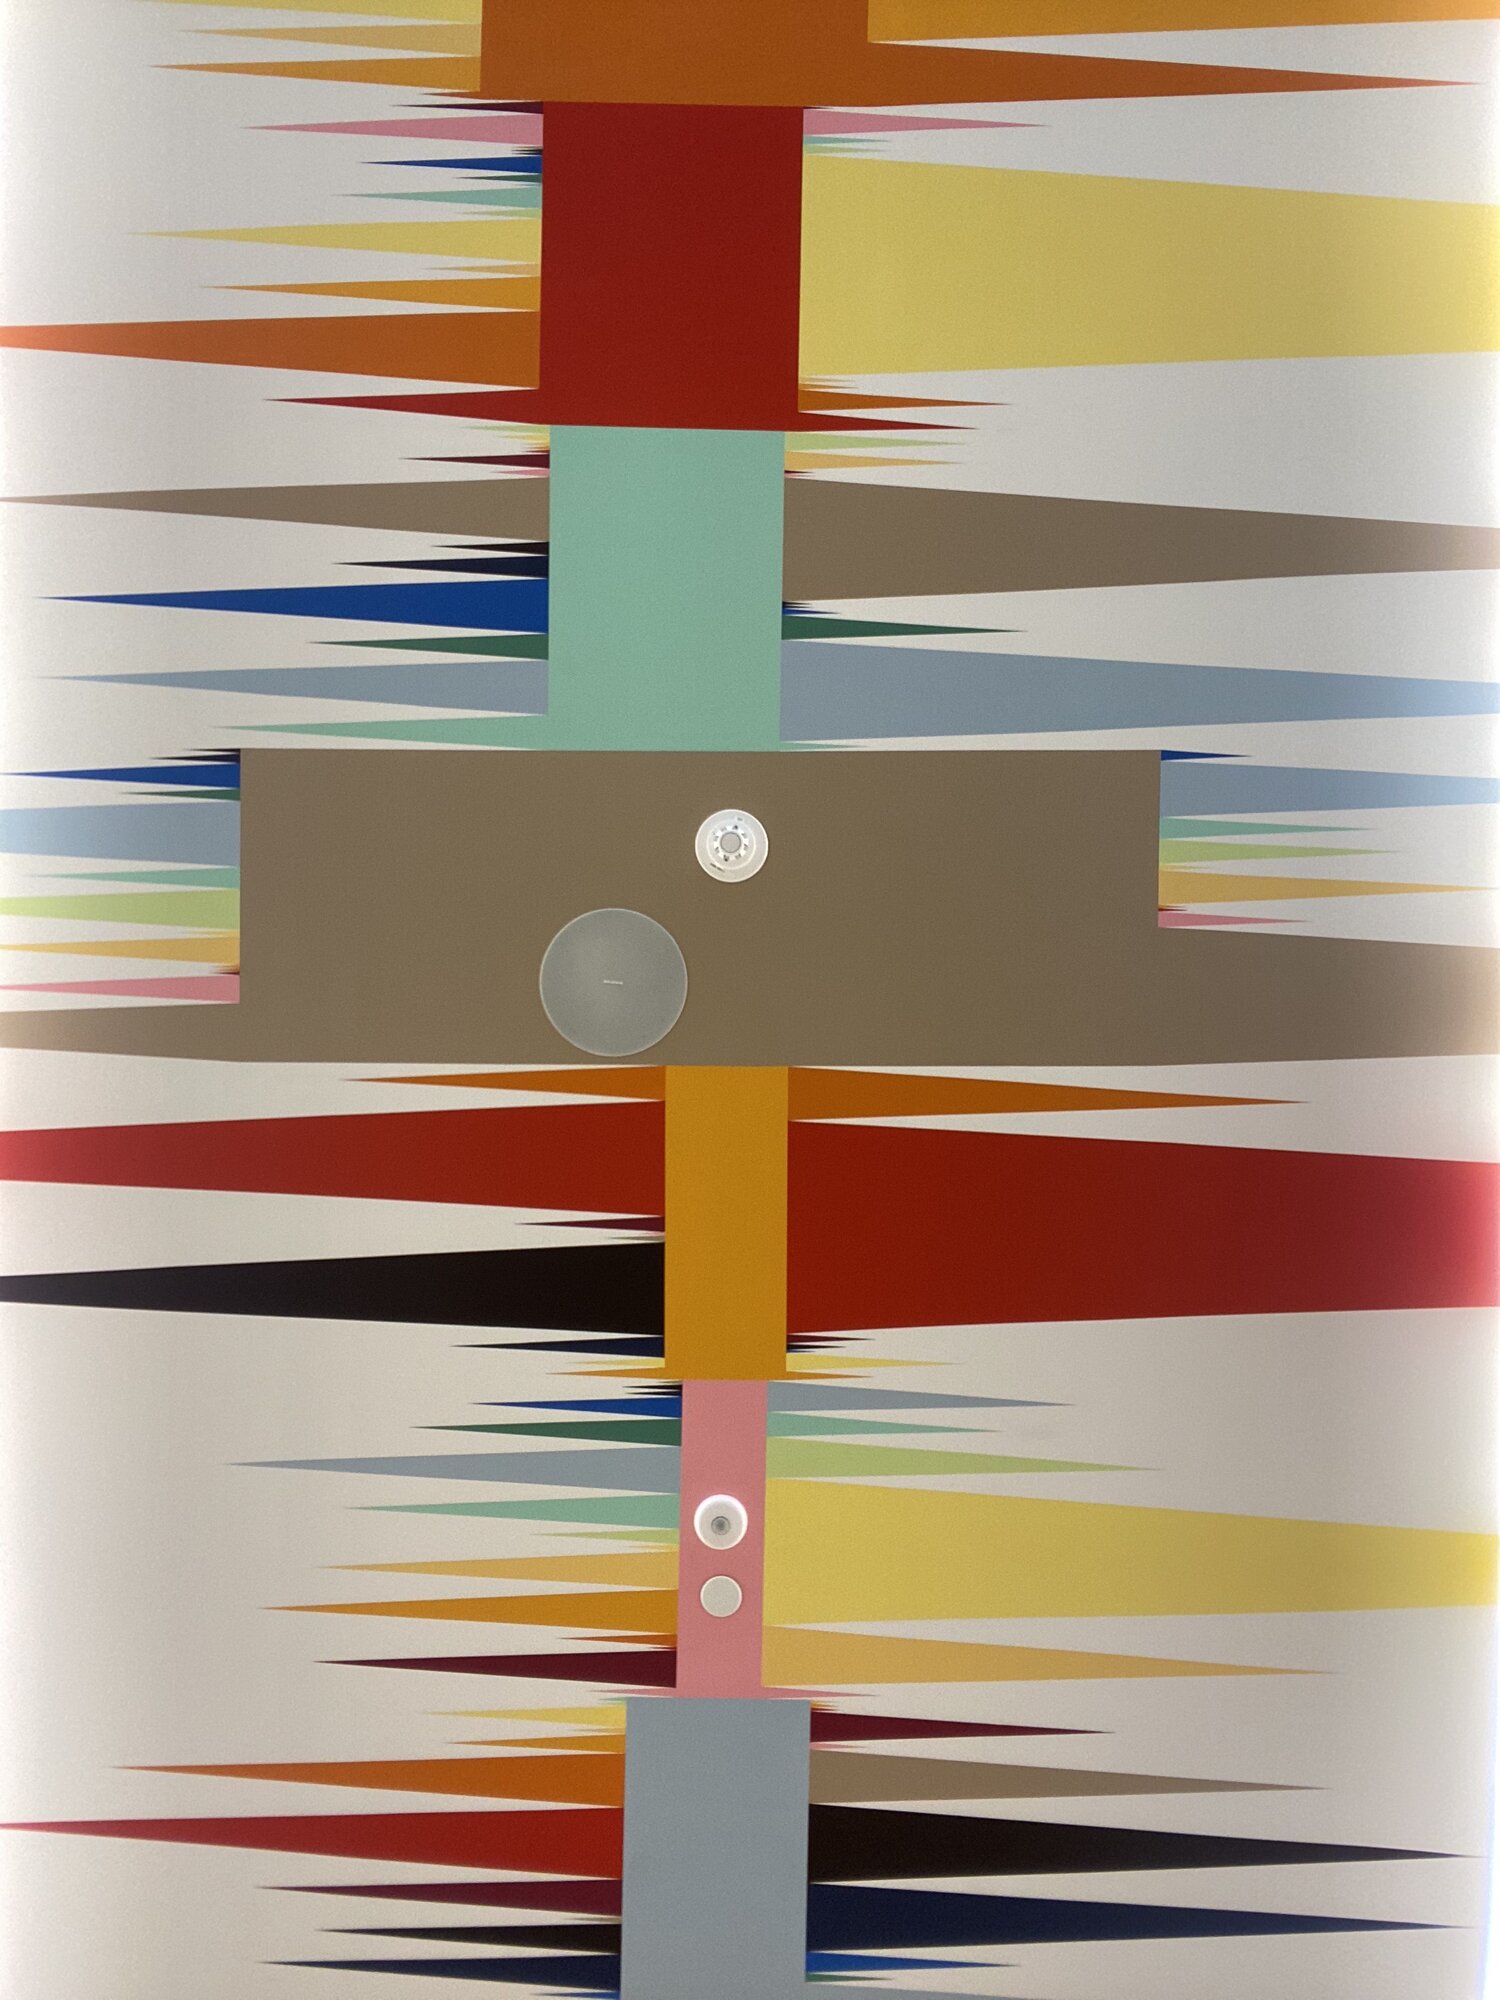 A zoomed-in view of a colorful mural painted on a white ceiling. Rectangular boxes Bars of varying widths in sevenix different colors of varying dimensions extend vertically along the central axis of the image. Both the second and fourth bars from top to bottom contain a couple of small circles representing additional information. From either side of the bars, along the horizontal axis emerge non-overlapping triangles of different sizes and colors.